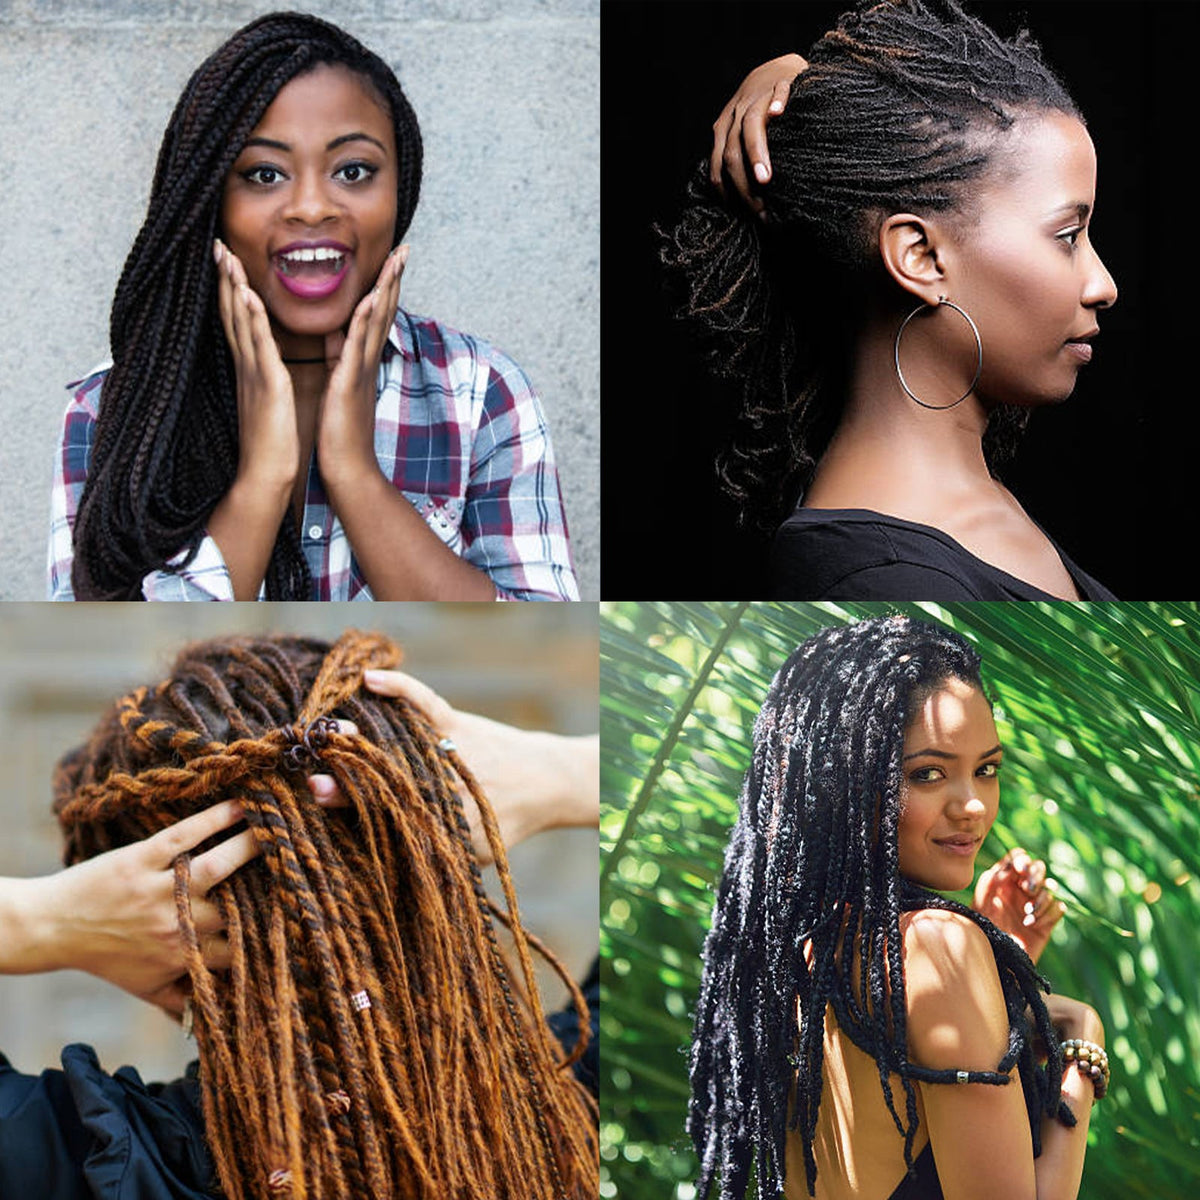 100% Human Hair Dreadlock Extensions 16Inch 10 Strands Handmade Natural Loc Extensions Human Hair Bundle Dreads Extensions For Woman&Men Can be Dyed & Bleached Natural Black 16inch length 0.4cm Width